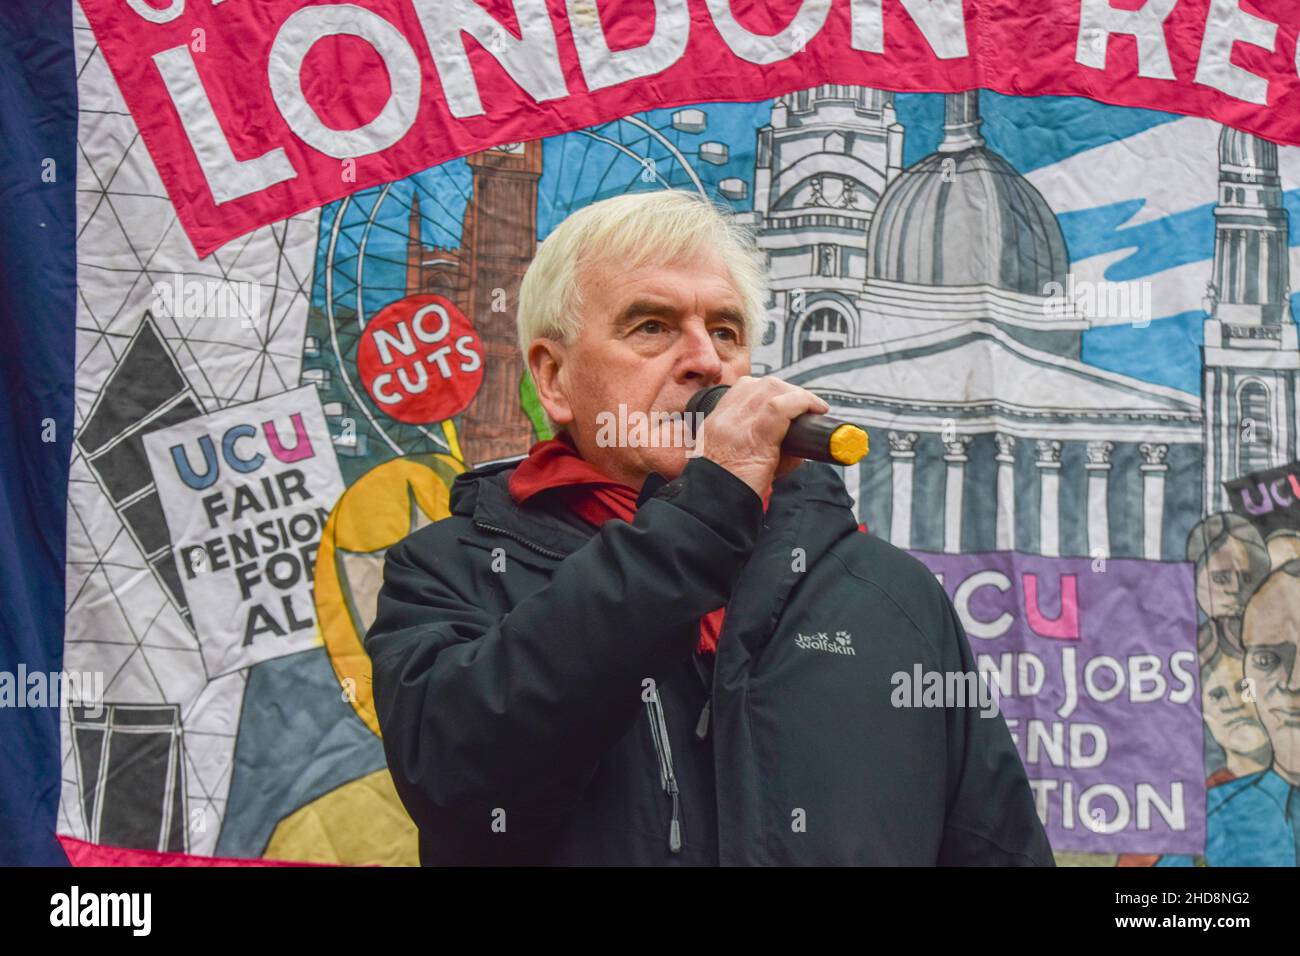 London, UK. 3rd December 2021. Labour MP John McDonnell speaking in Tavistock Square. University staff and members of the University and College Union (UCU) have taken strike action and marched through Central London in protest over gender, ethnic and disability pay inequality, work conditions, and falling pay. Stock Photo